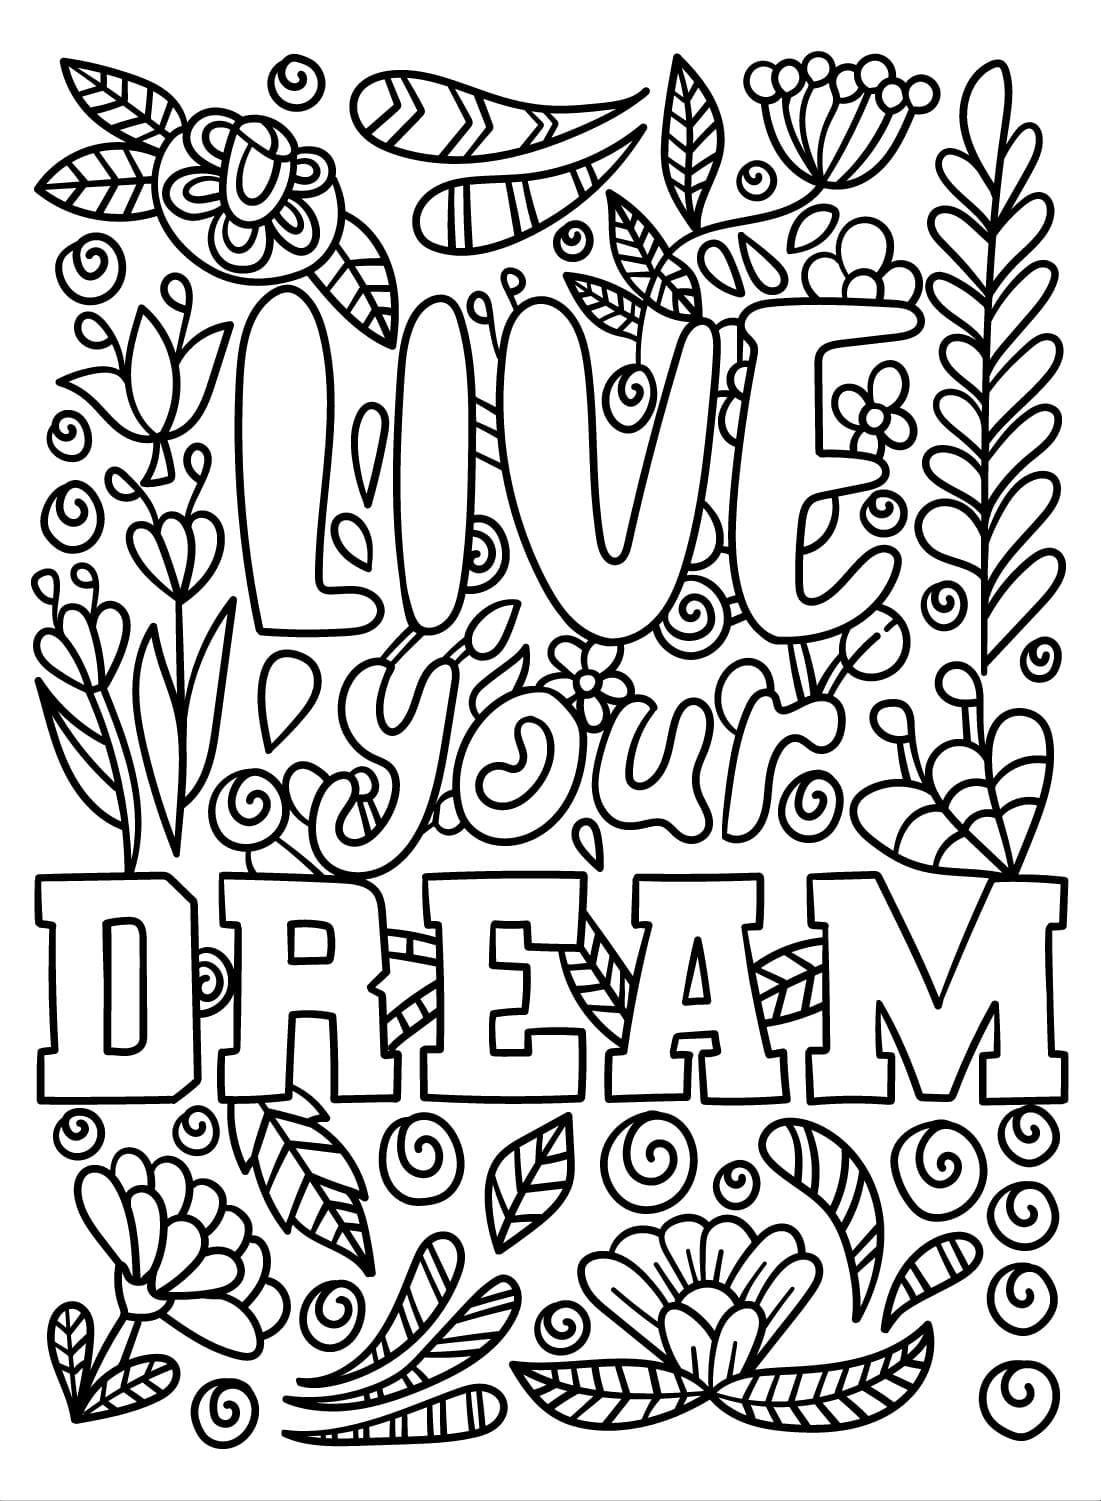 Inspirational - Dream Big coloring page - Download, Print or Color Online  for Free